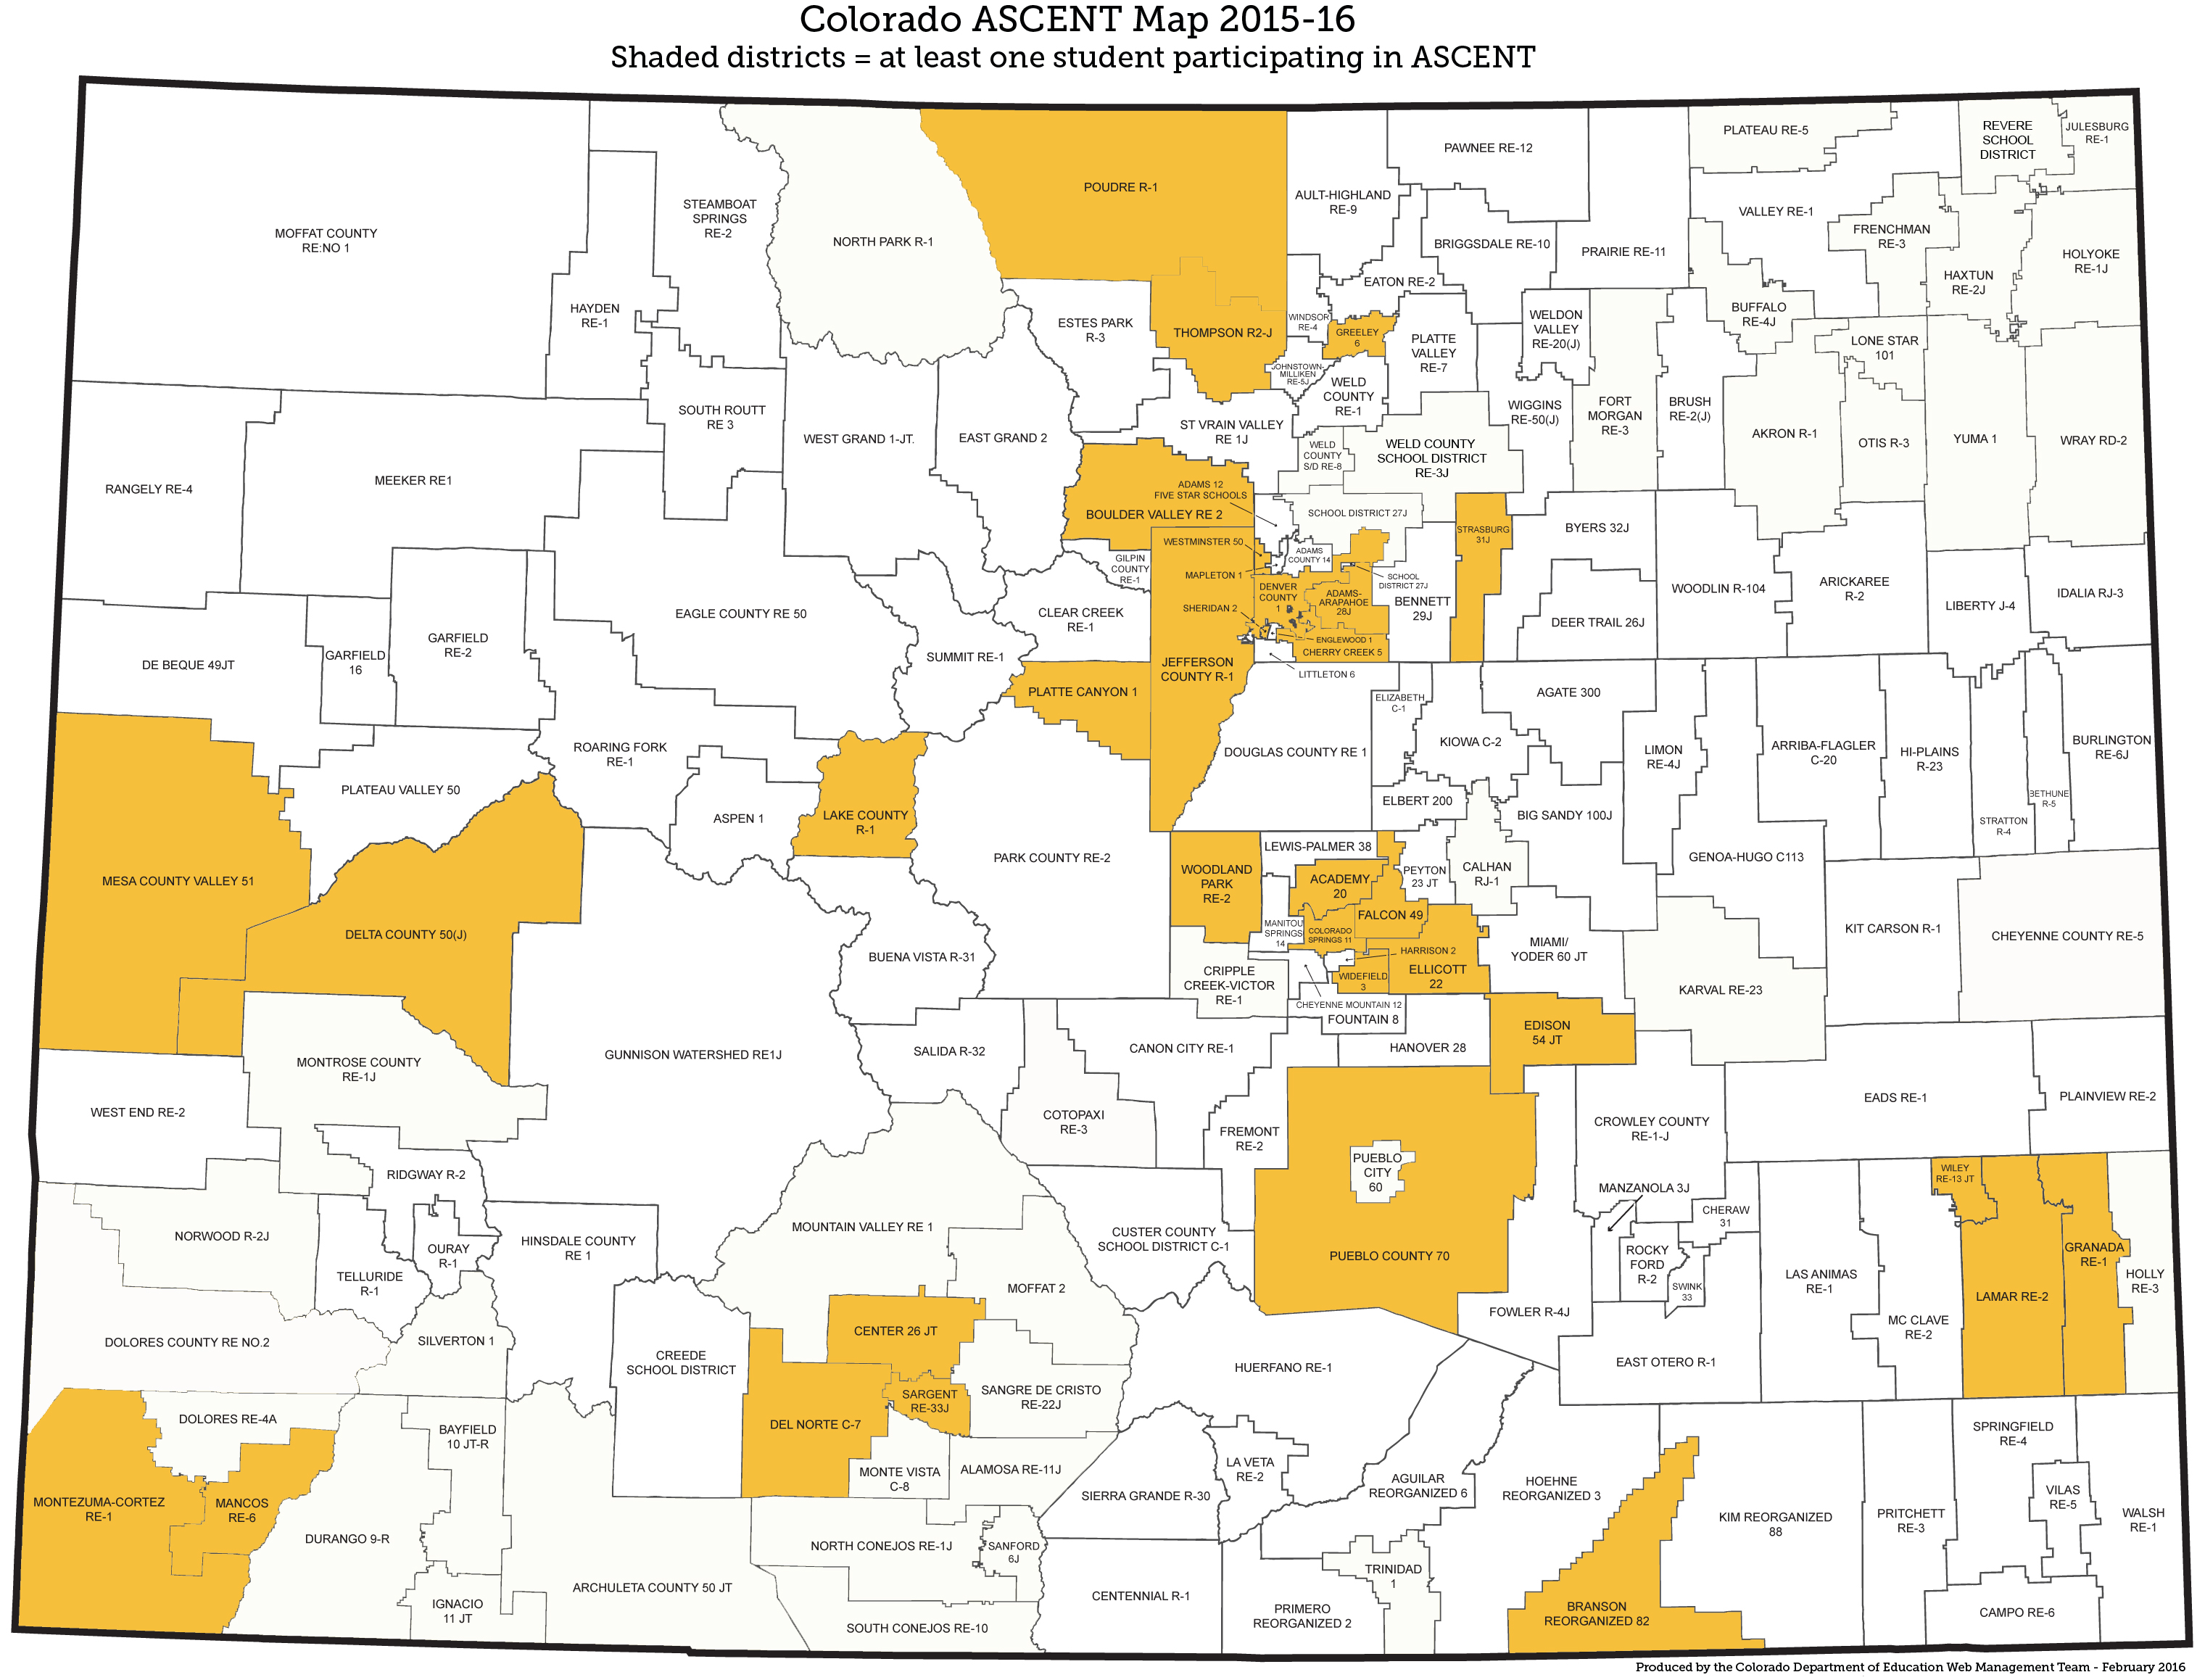 map of ascent participation by district 2015-16